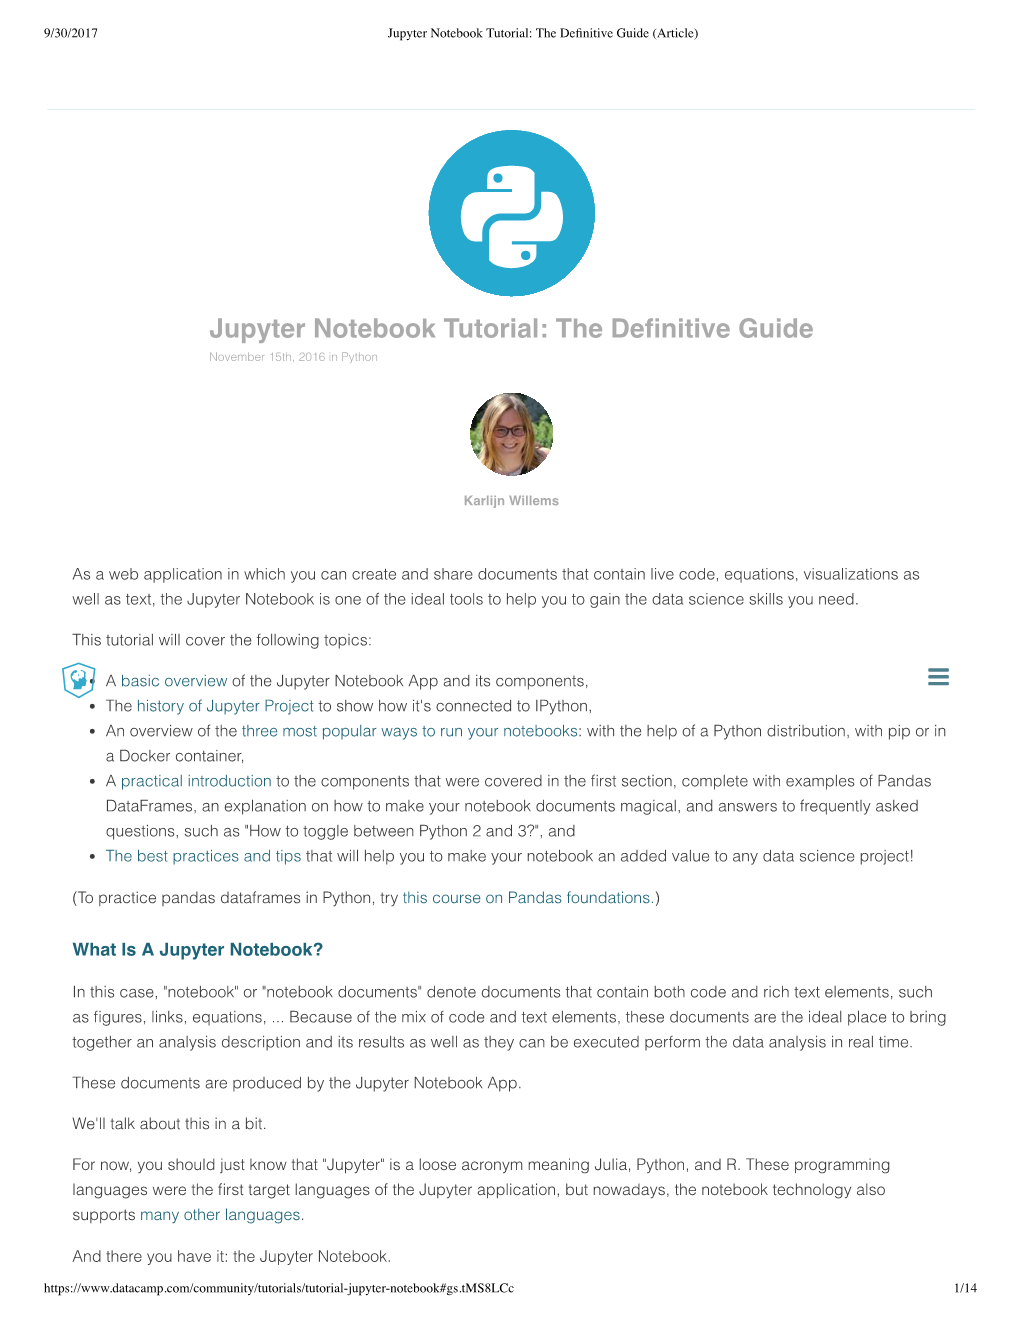 Jupyter Notebook Tutorial: the Definitive Guide